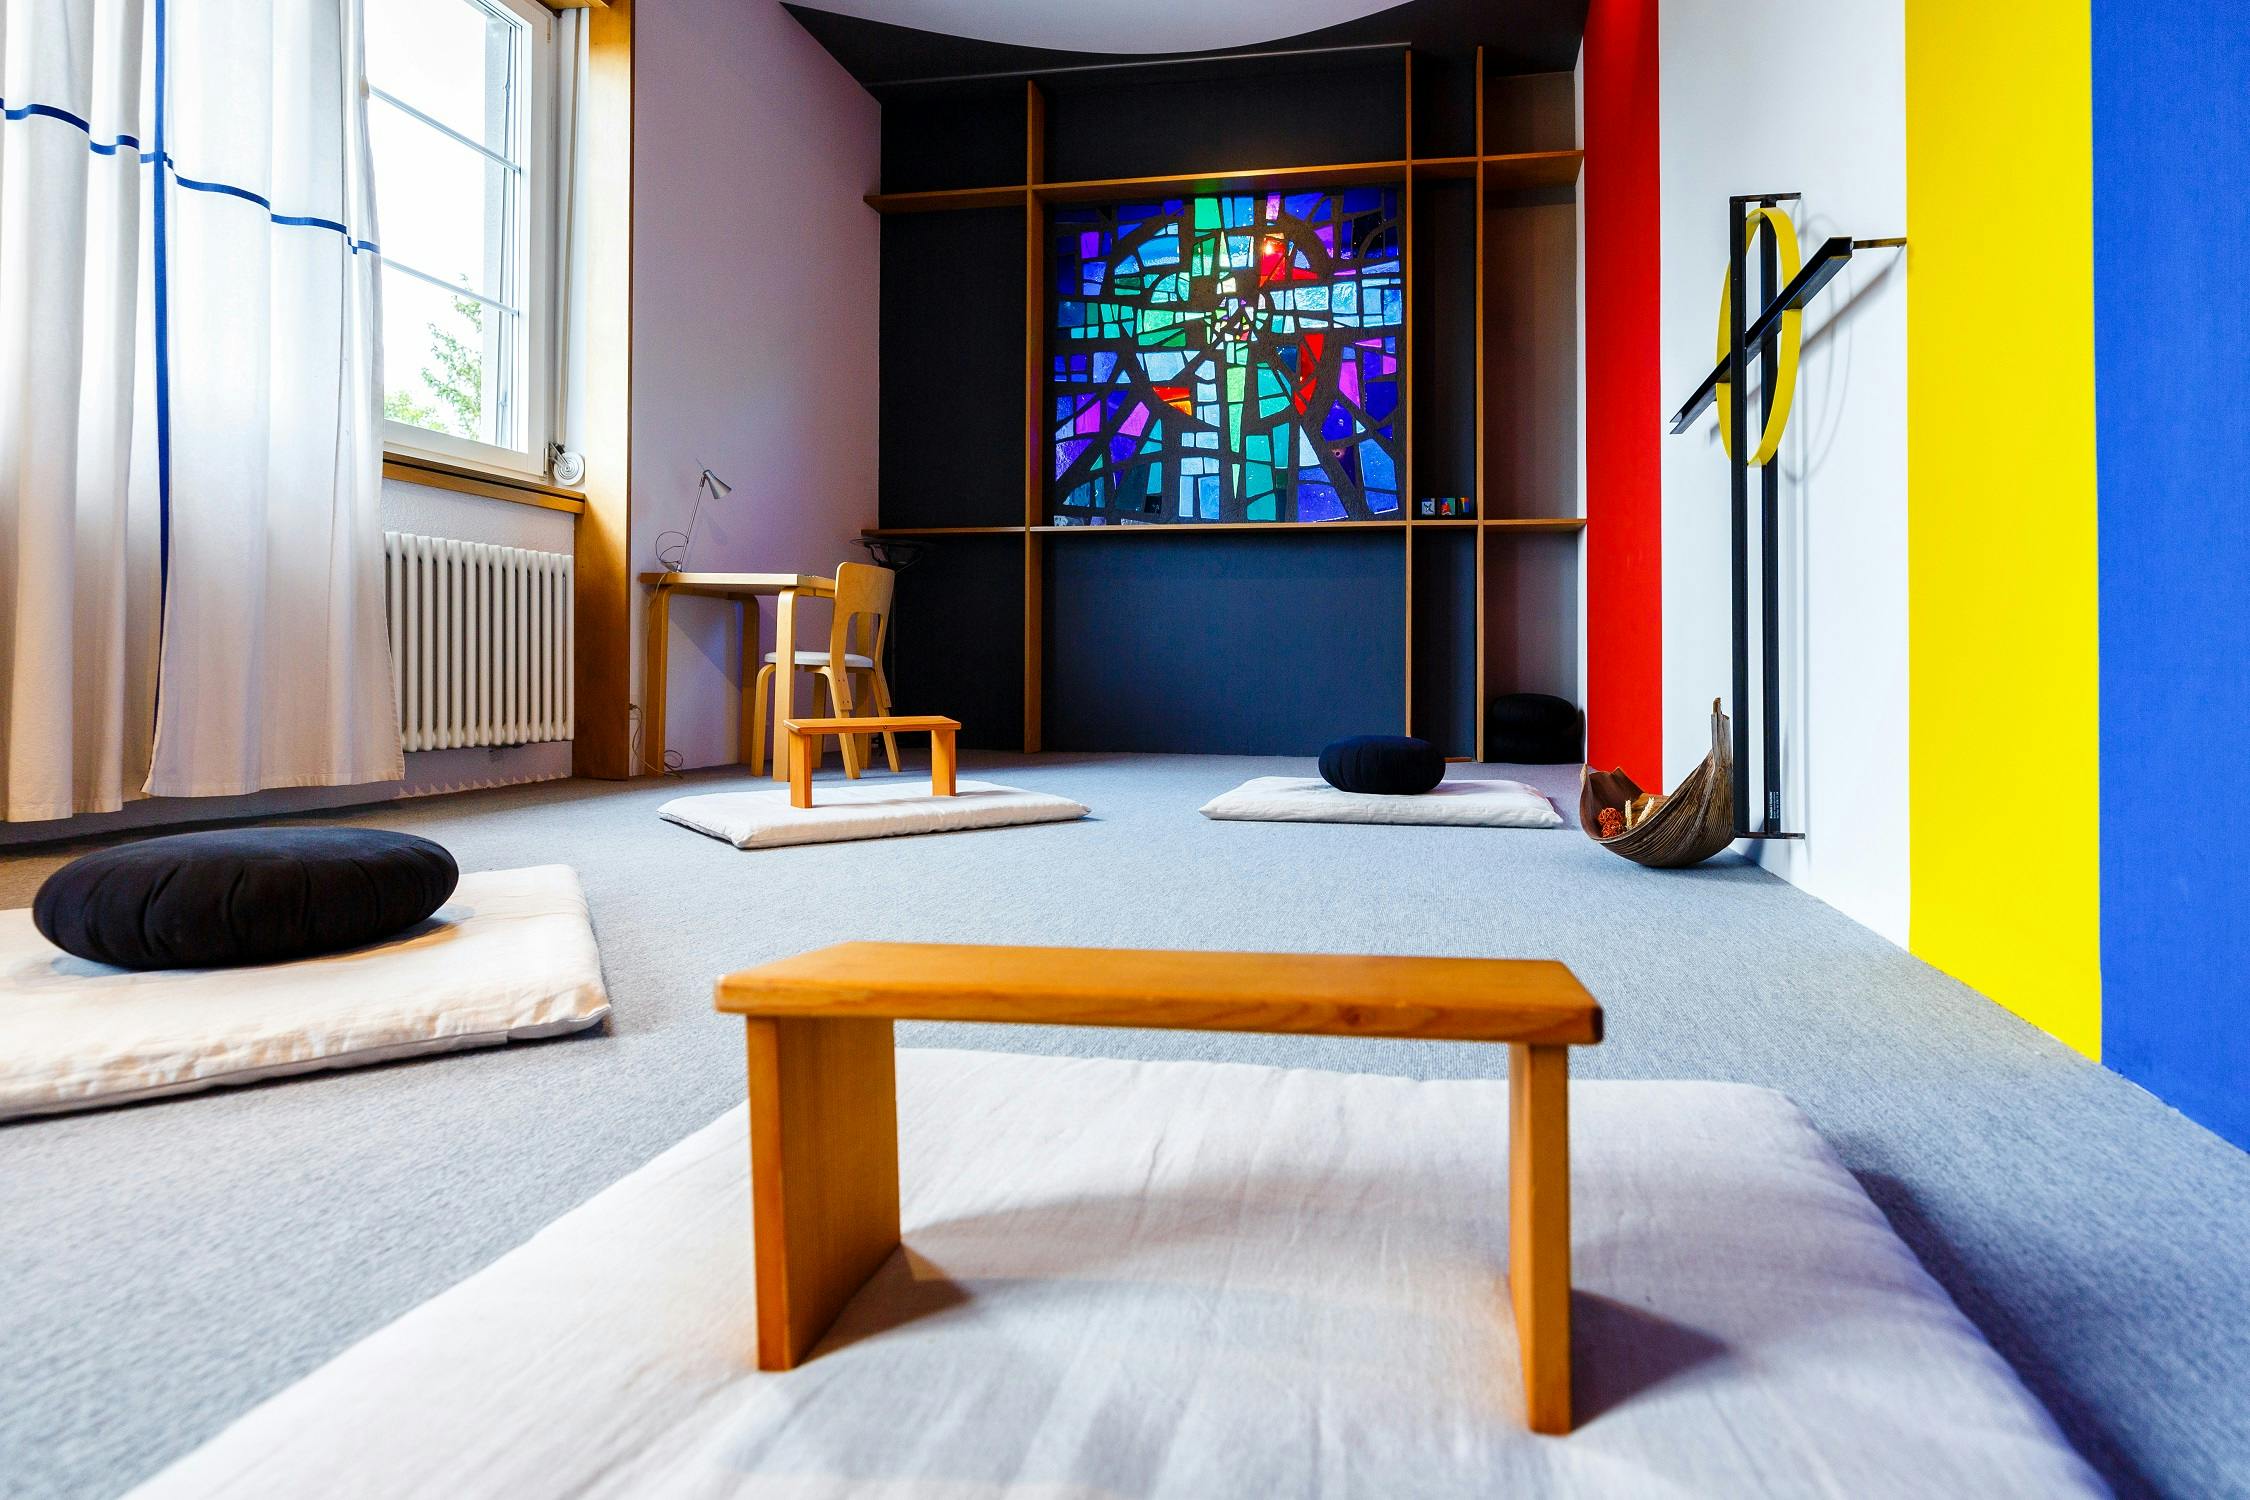 Modern meditation room with colourful church window, cushions and wooden furniture.